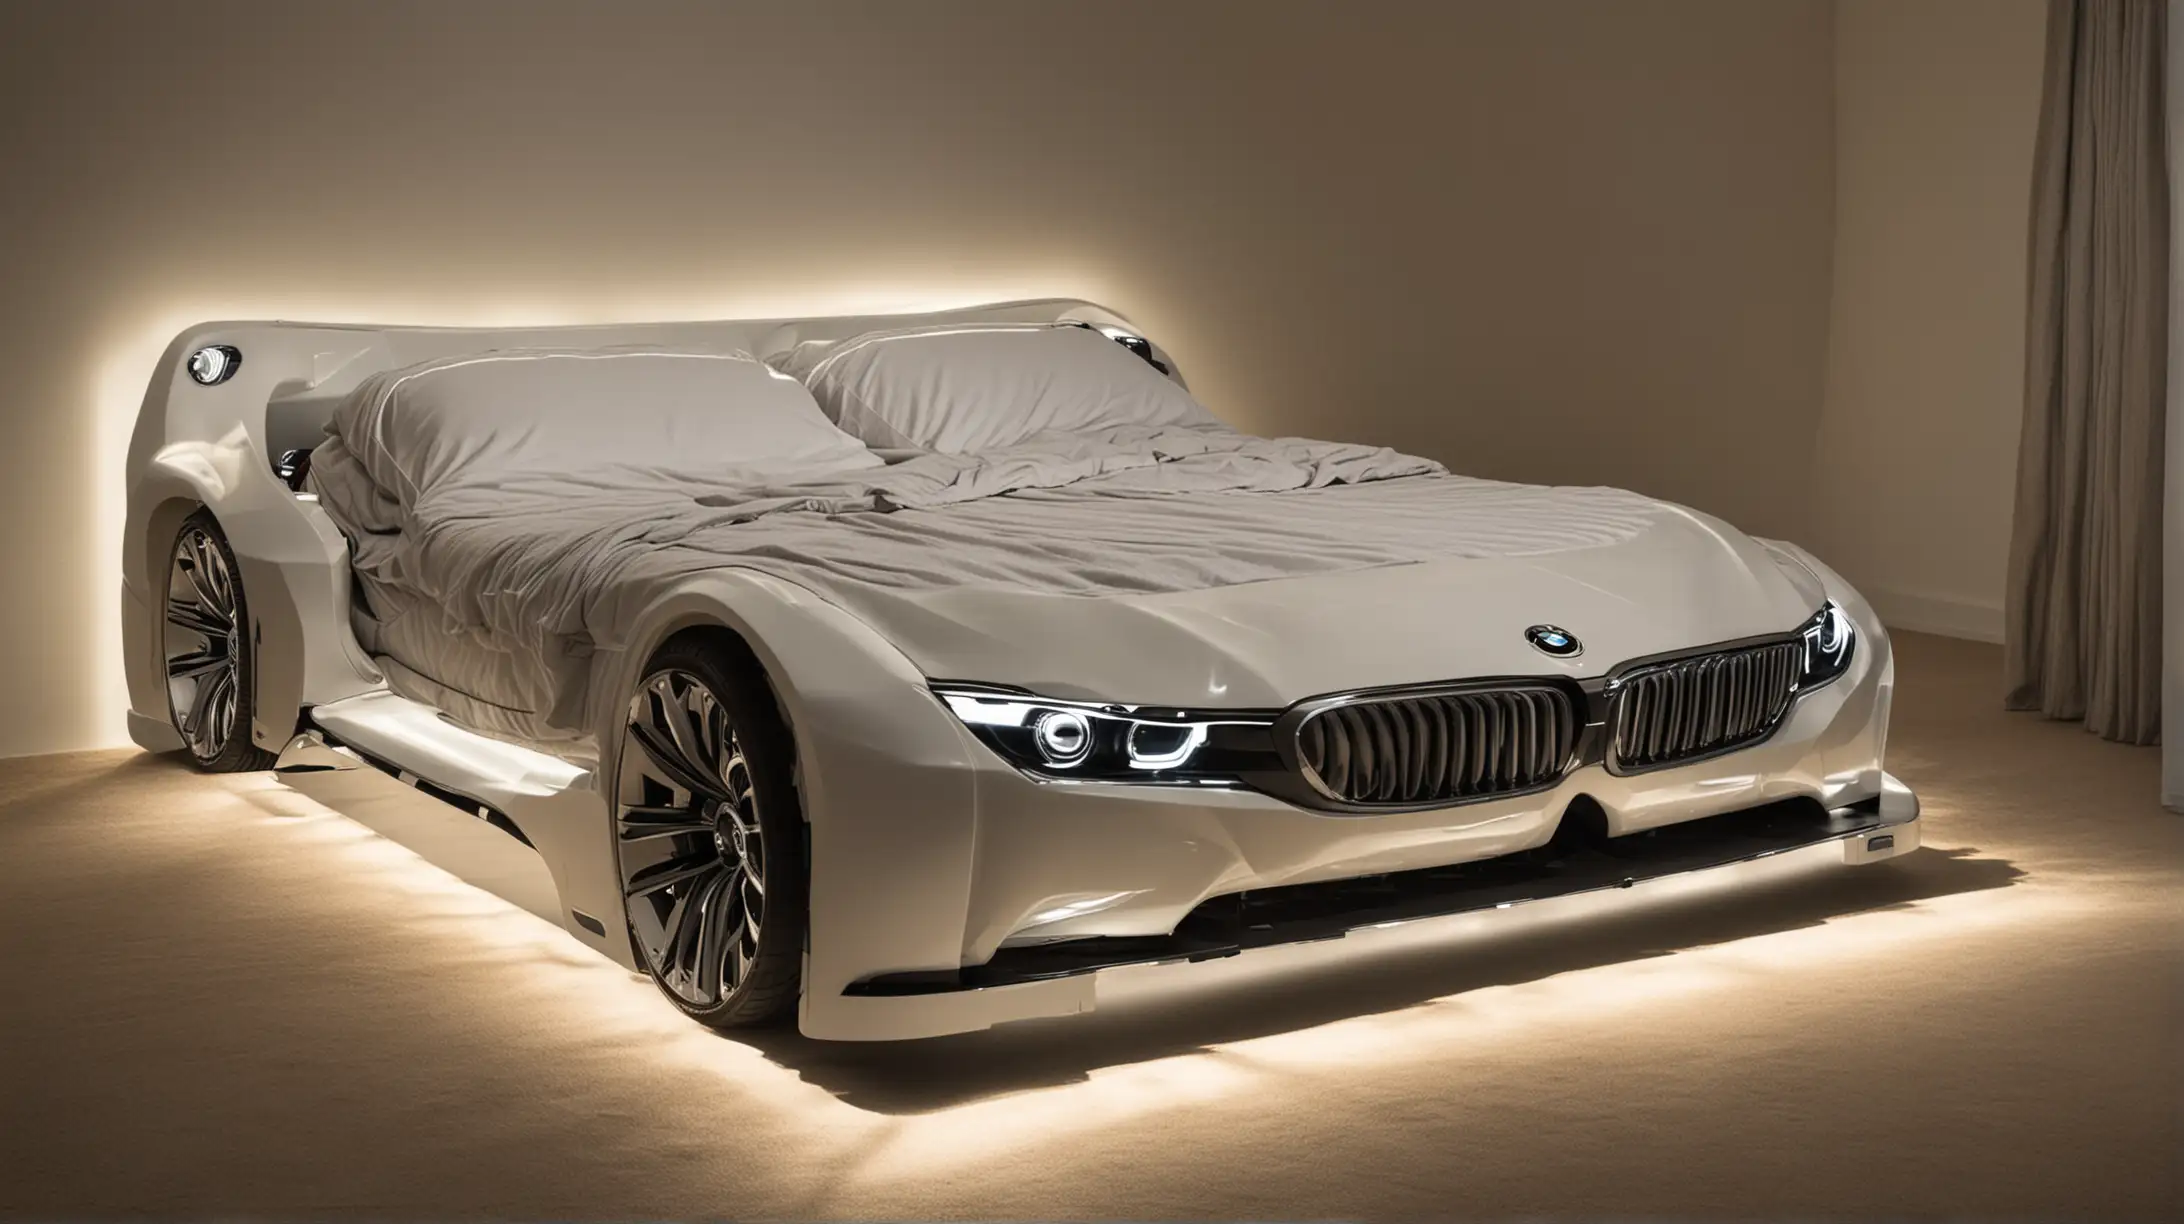 BMW CarShaped TwoBed for Car Enthusiasts with Illuminated Headlights